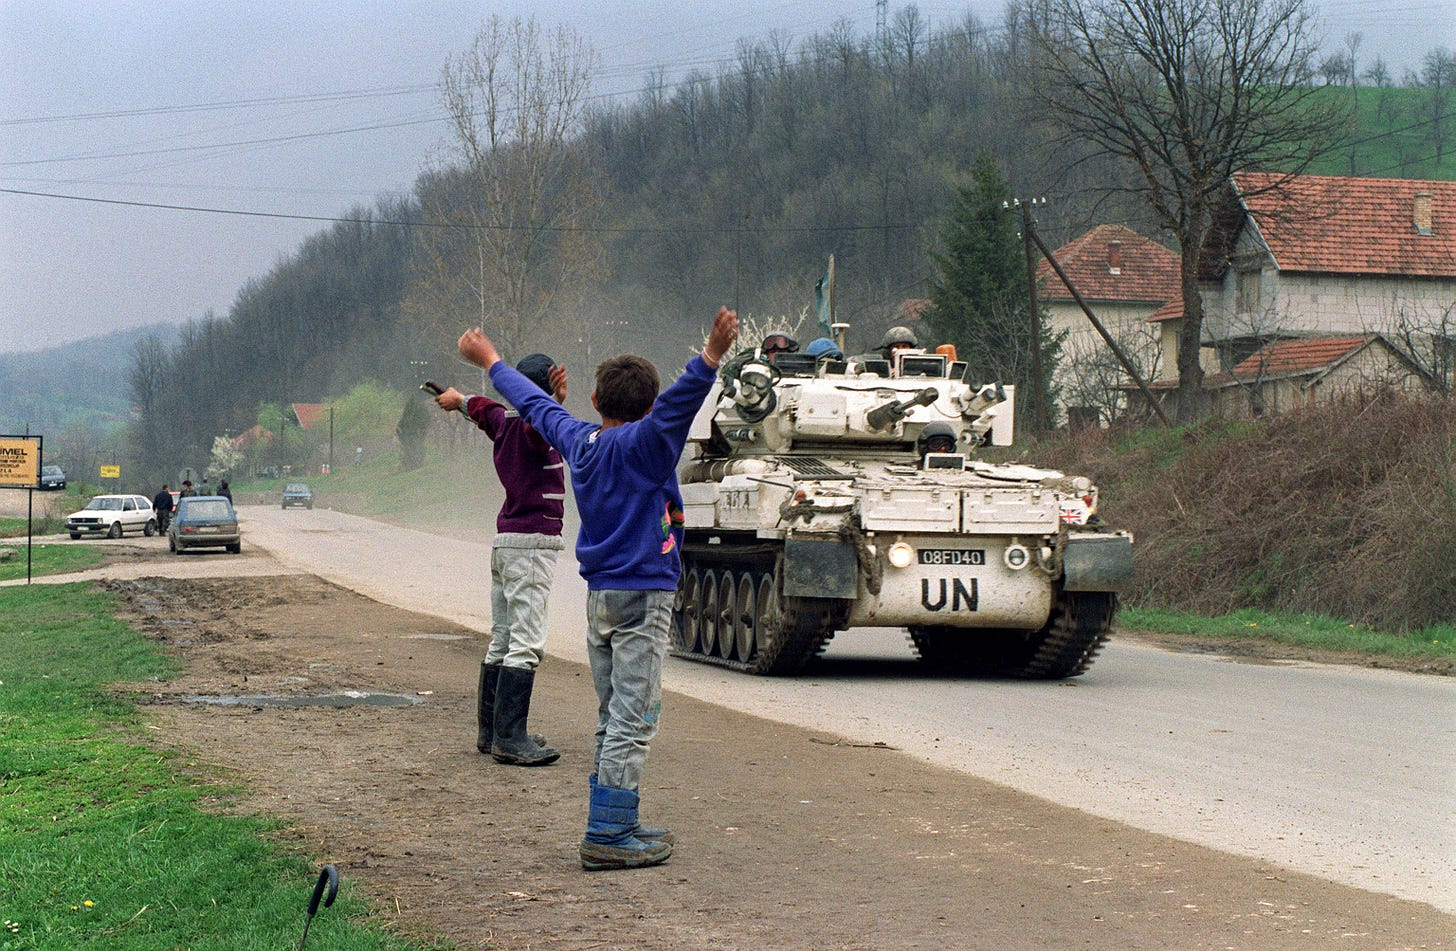 UN soldiers in an Infantry Fighting Vehicle (IFV) on patrol in Bosnia are warmly greeted by Bosnians.